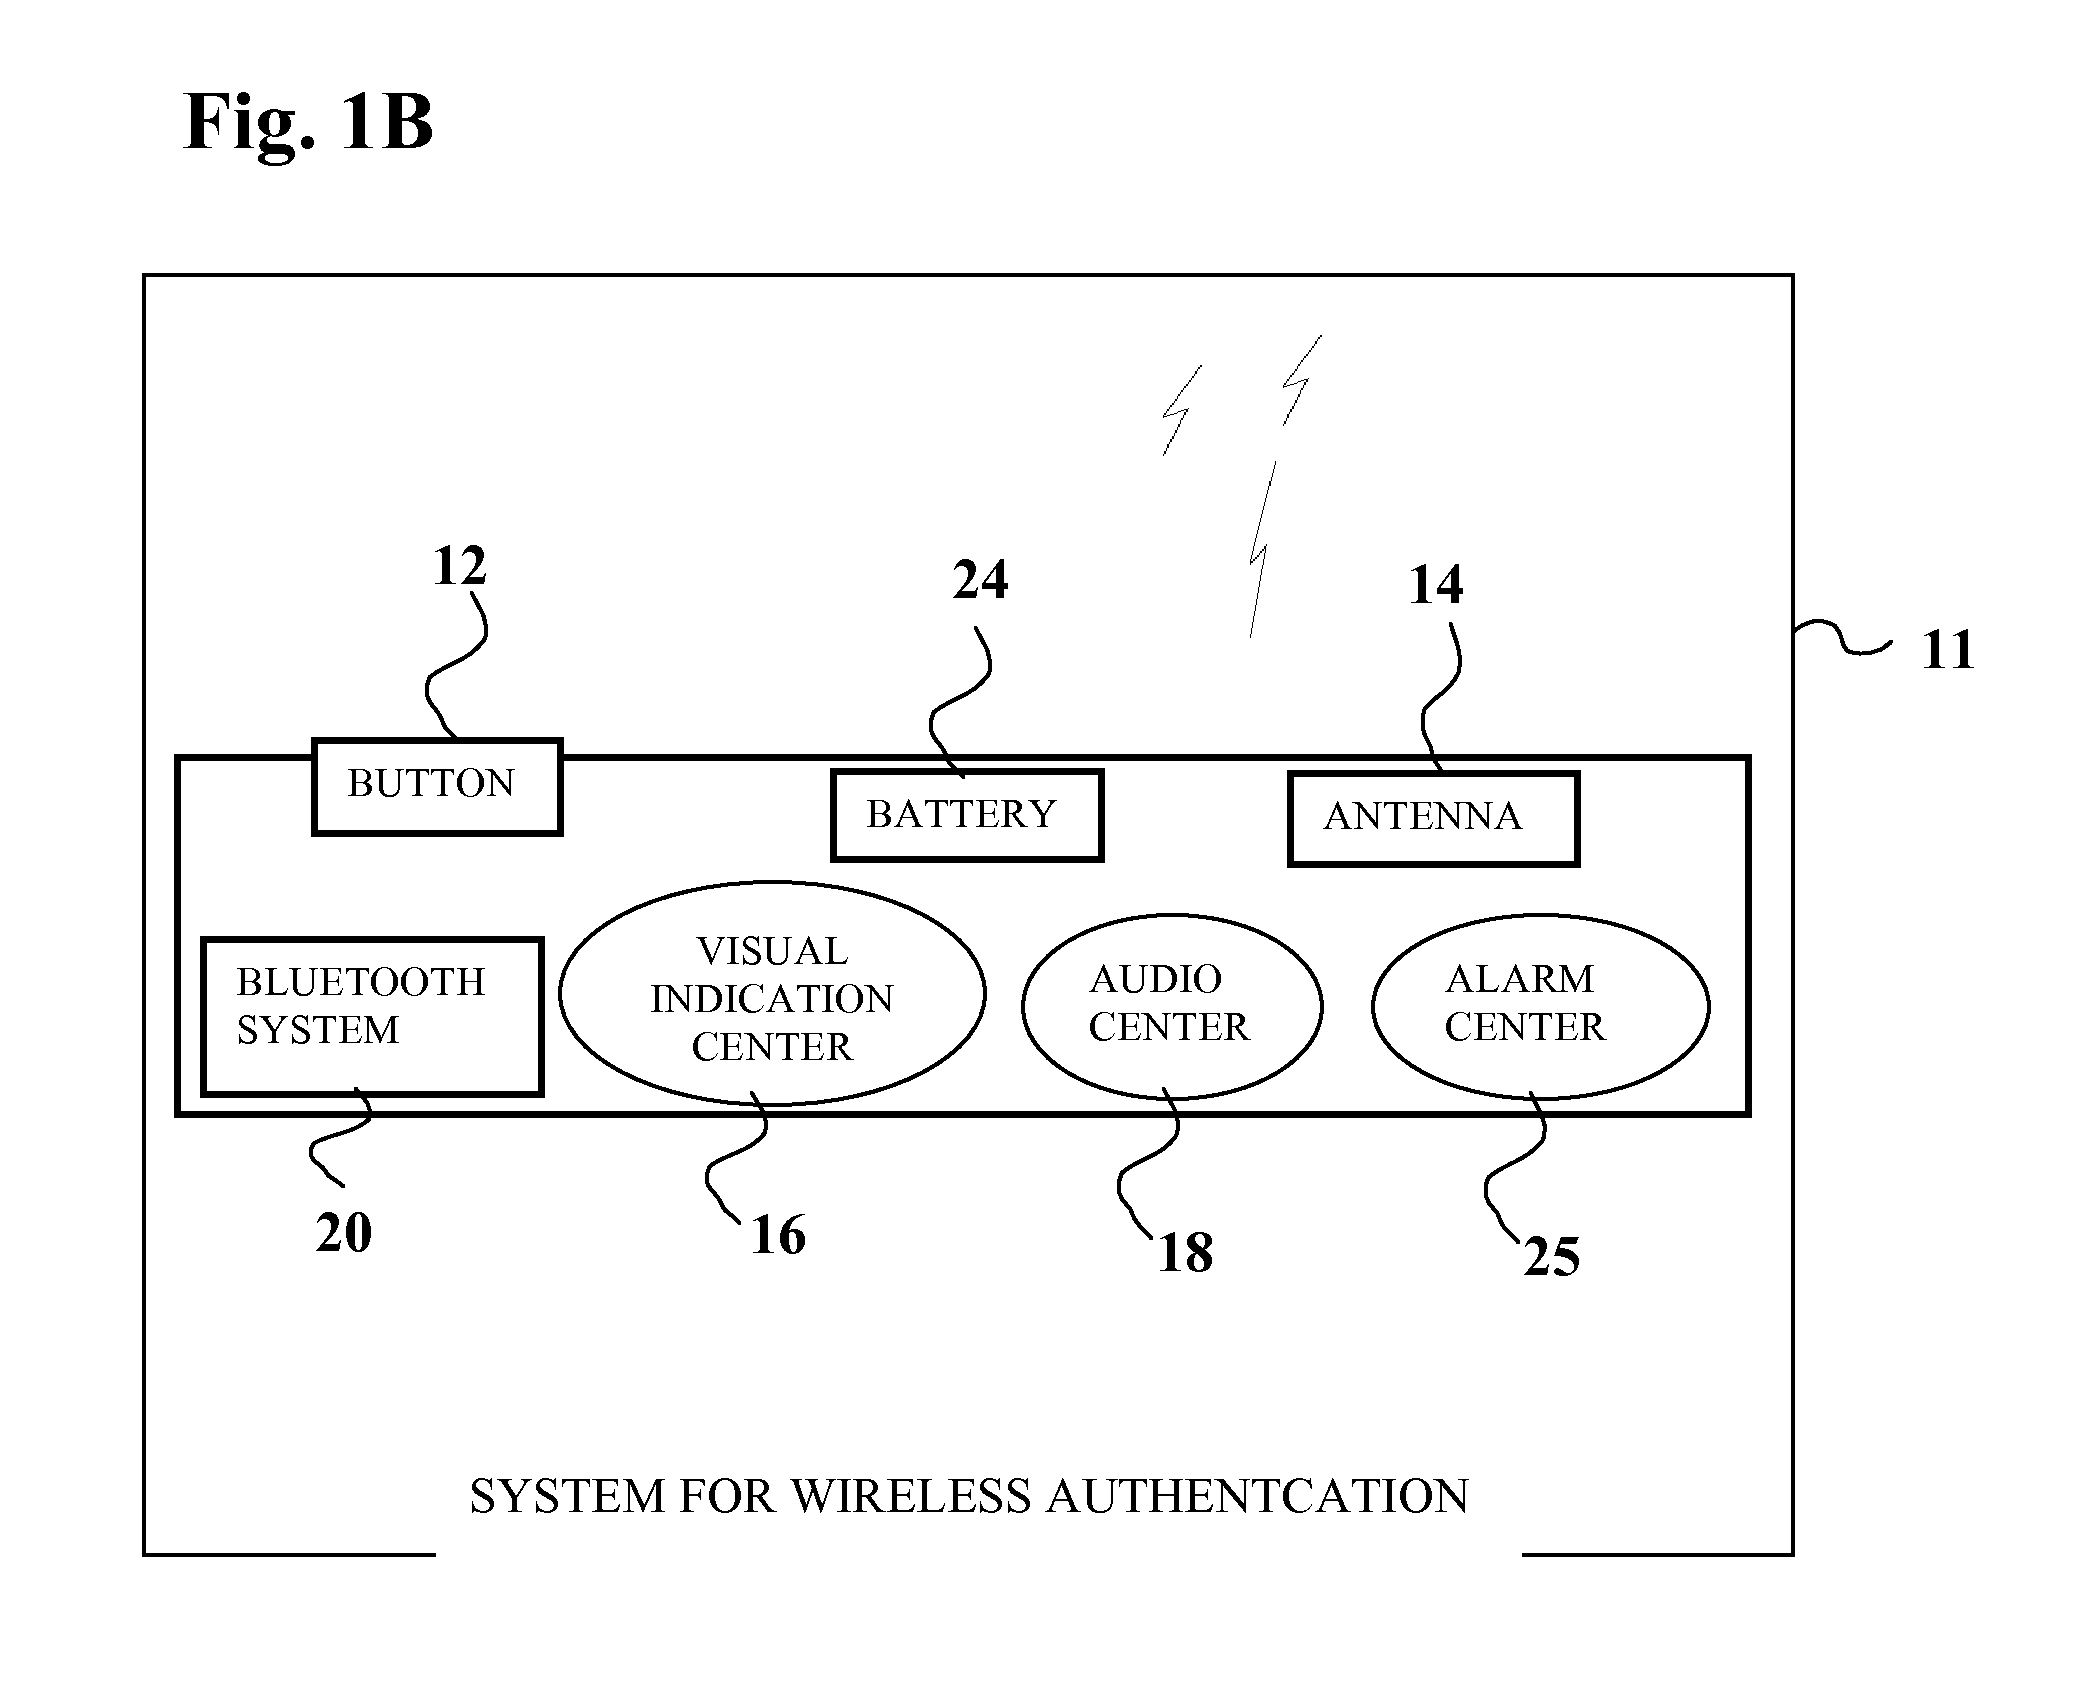 Systems for wireless authentication based on bluetooth proximity